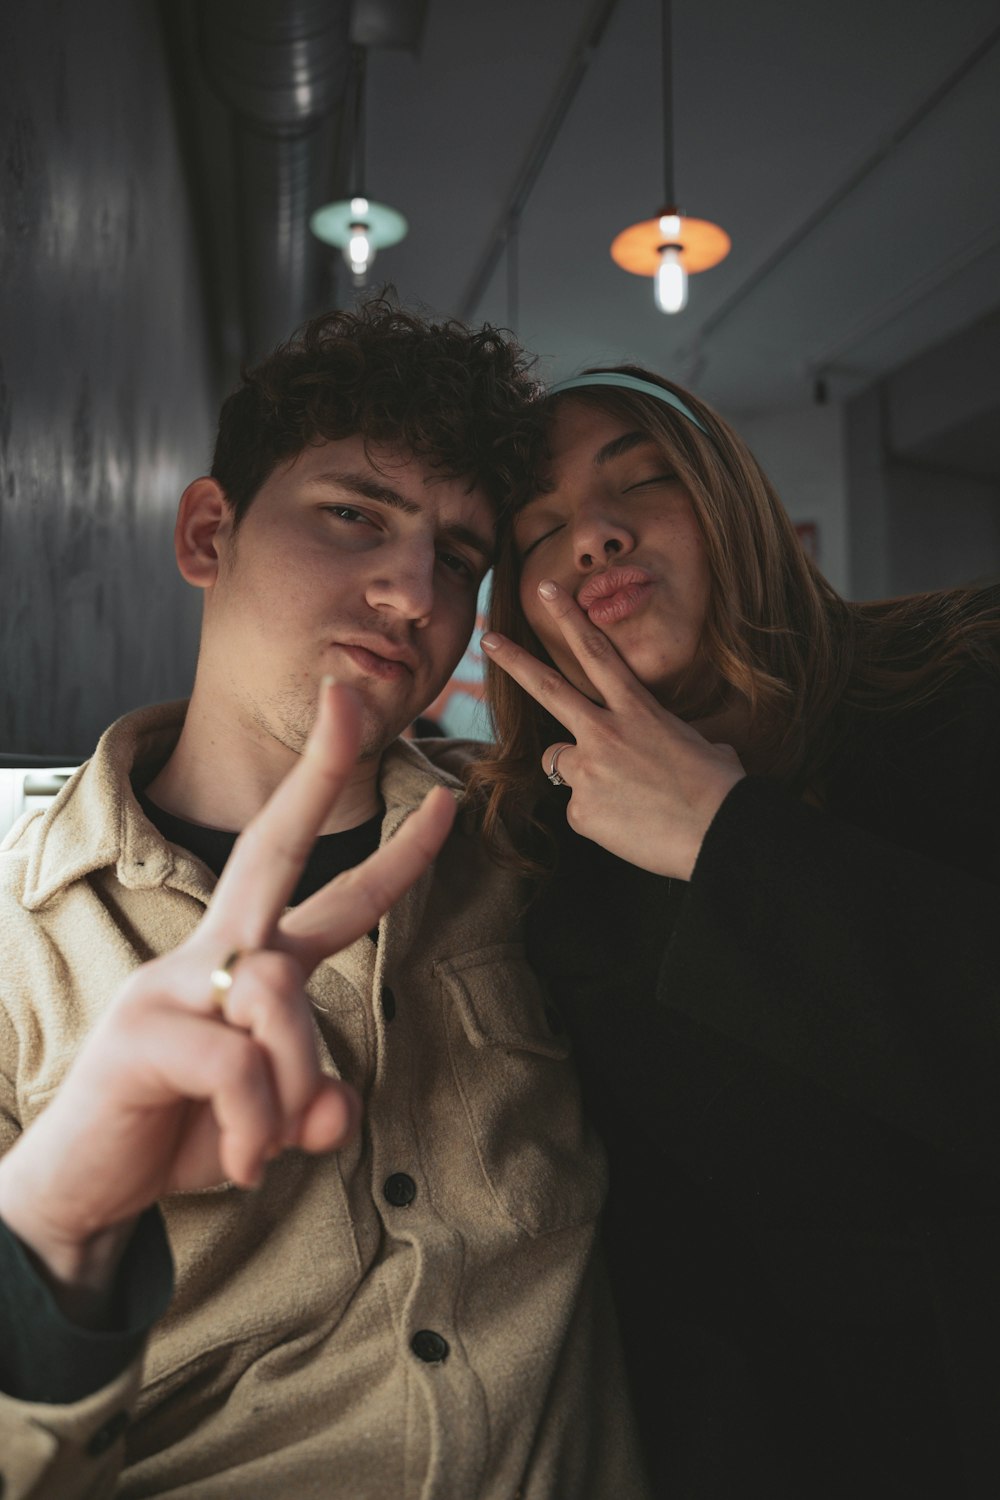 a man and a woman making a peace sign